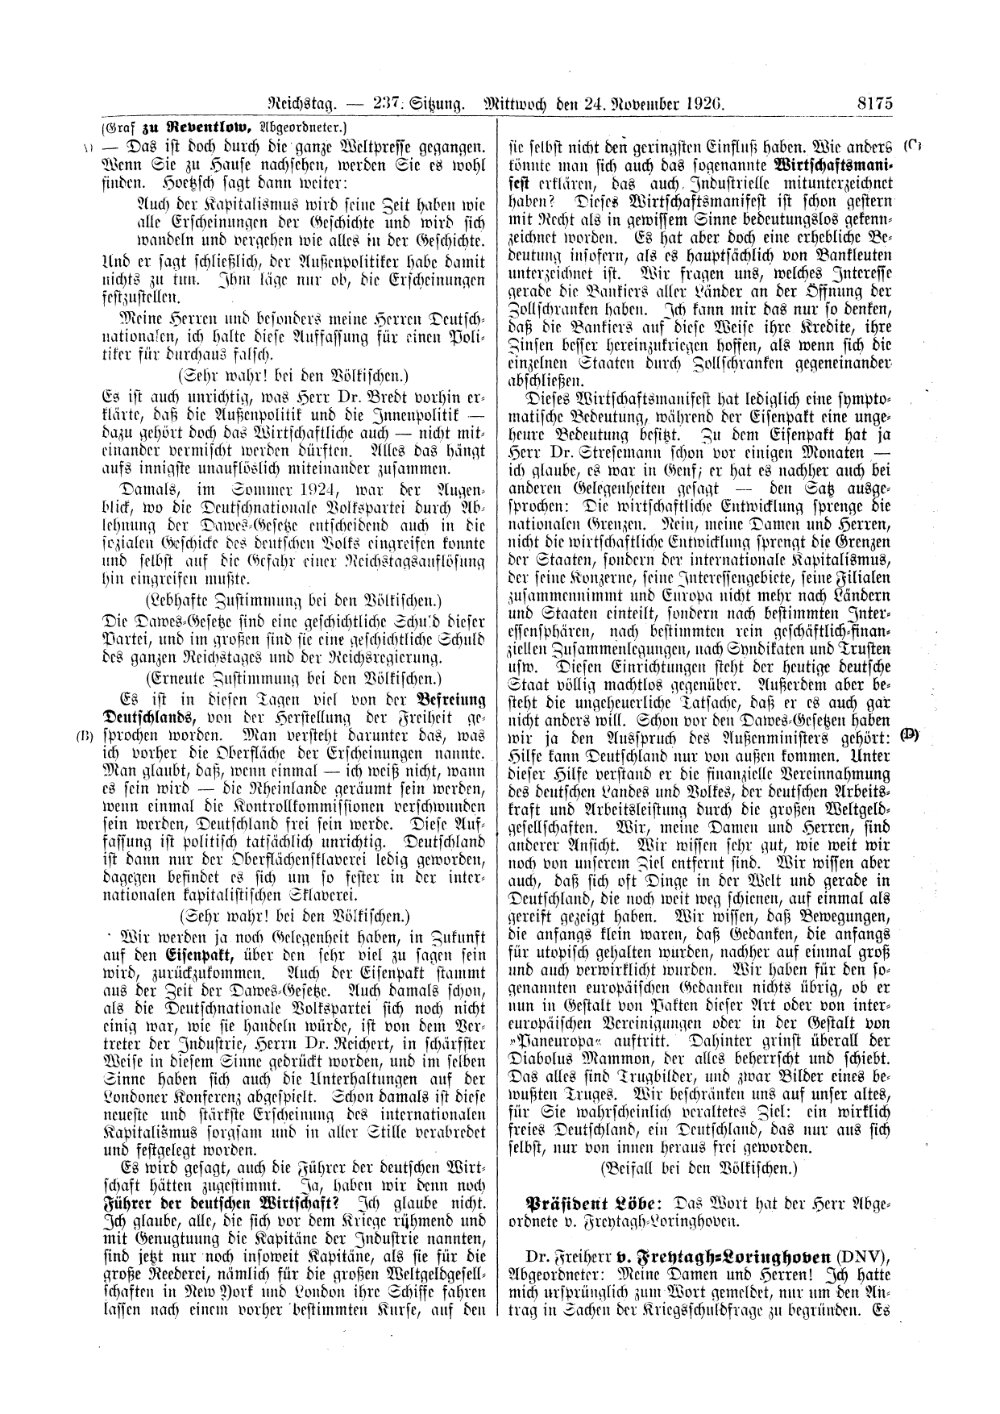 Scan of page 8175